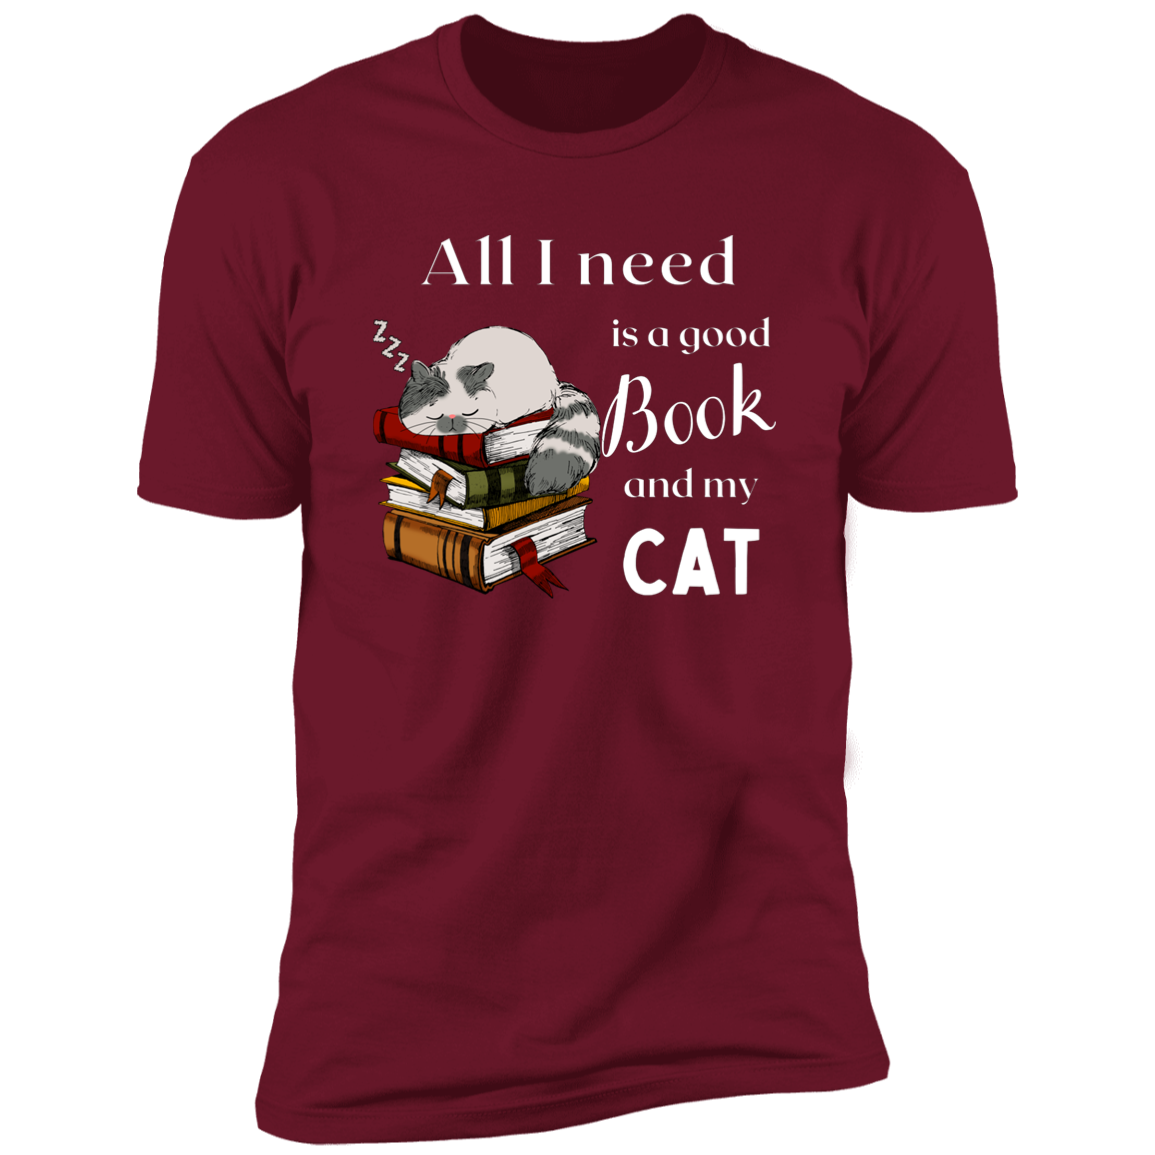 All I Need is a Good Book and My Cat t-shirt for humans, in cardinal red